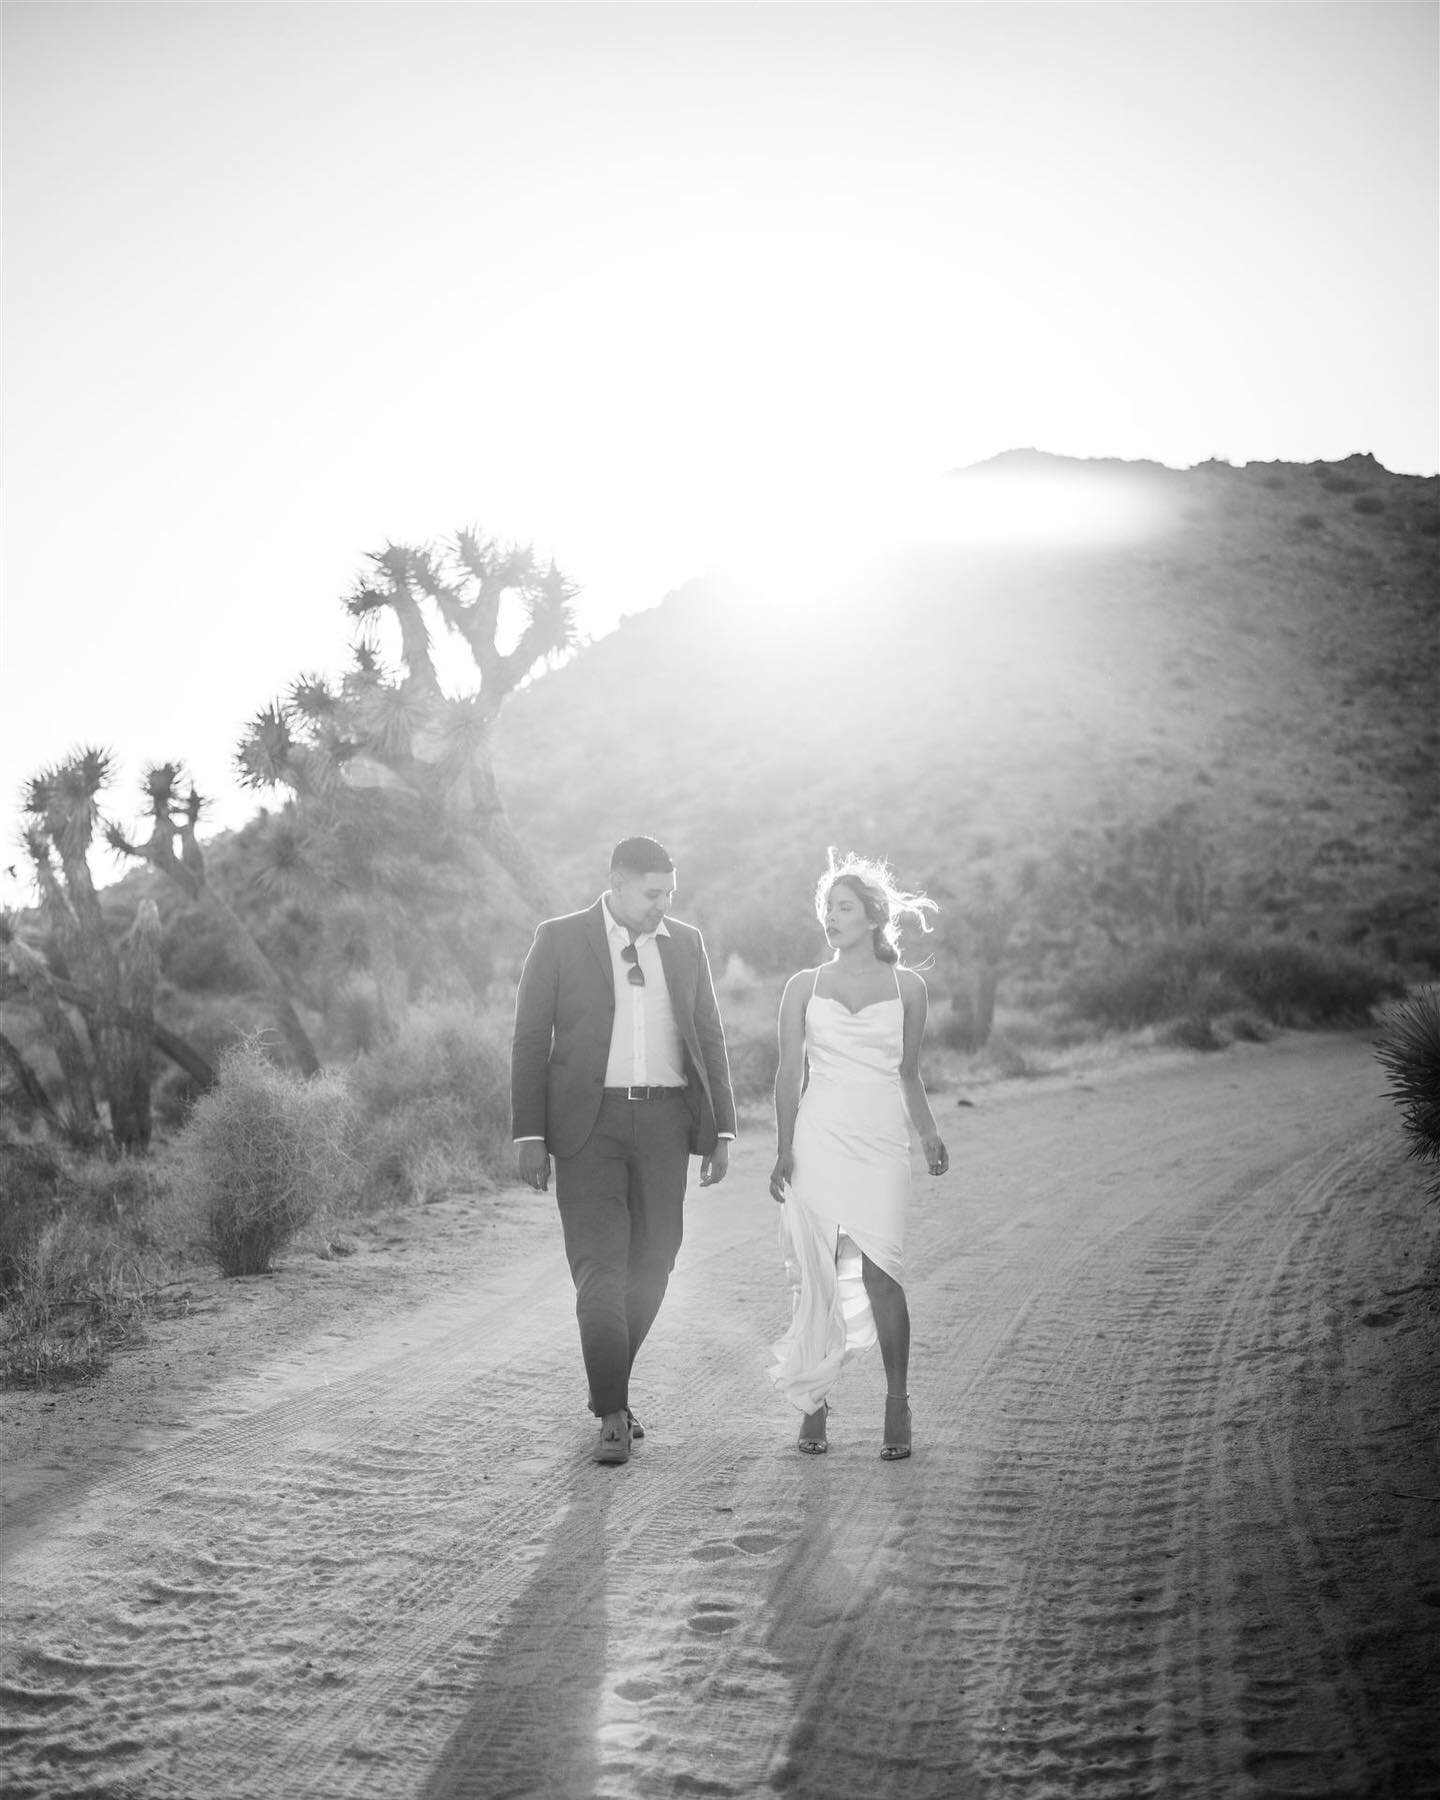 Every time we are back in California, we simply cannot get over the light. How stunning are Madai and Hector bathed in that evening glow in Joshua Tree? These were shot on a mix of digital and 35mm film. 

#joshuatreenationalpark #joshuatreewedding #